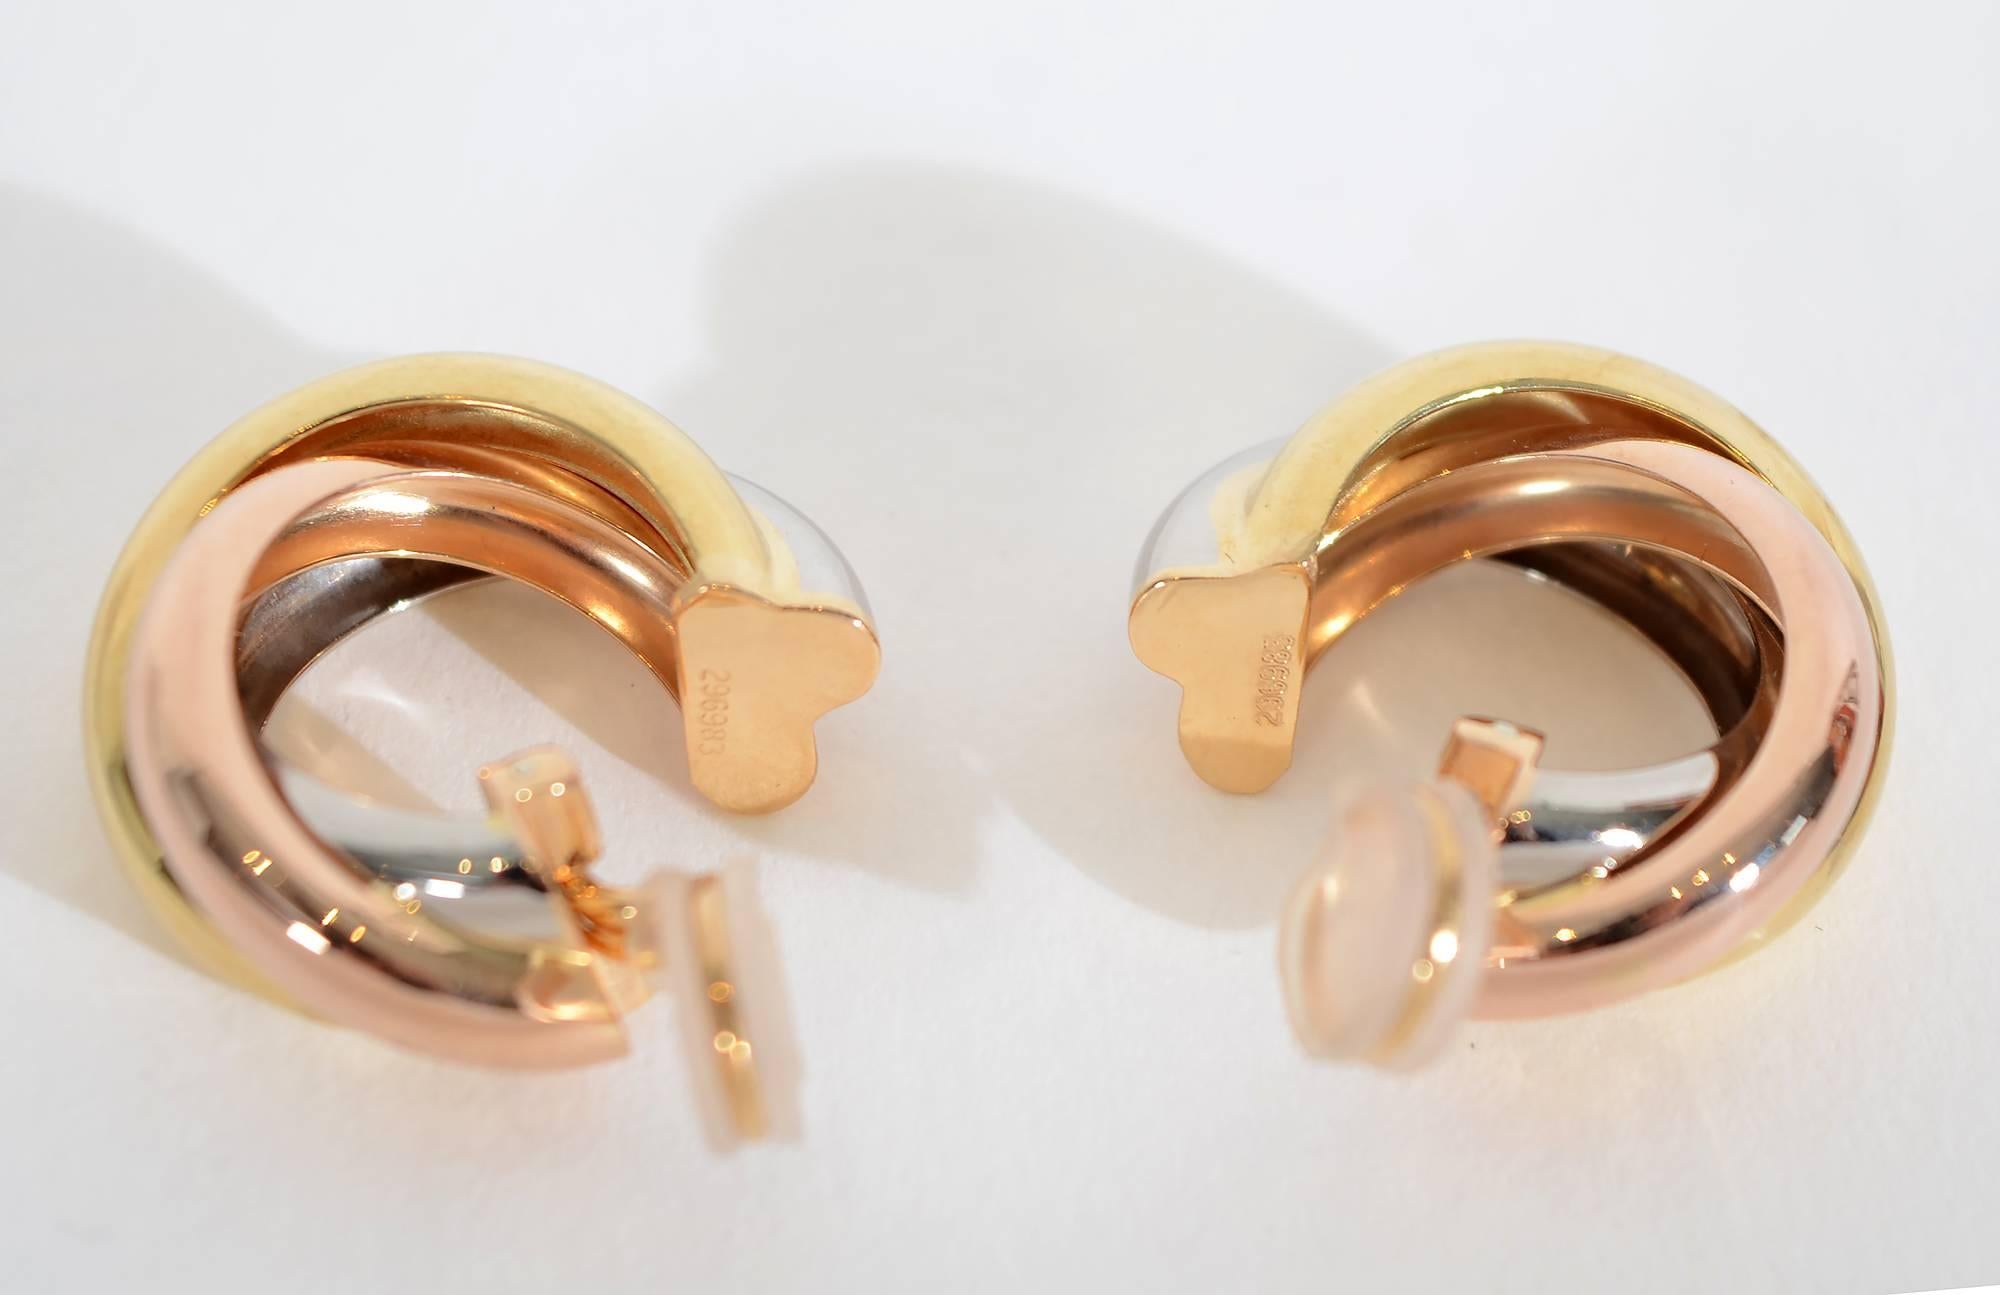 Cartier tricolor gold hoop earrings in a size no longer in production. They measure 7/8